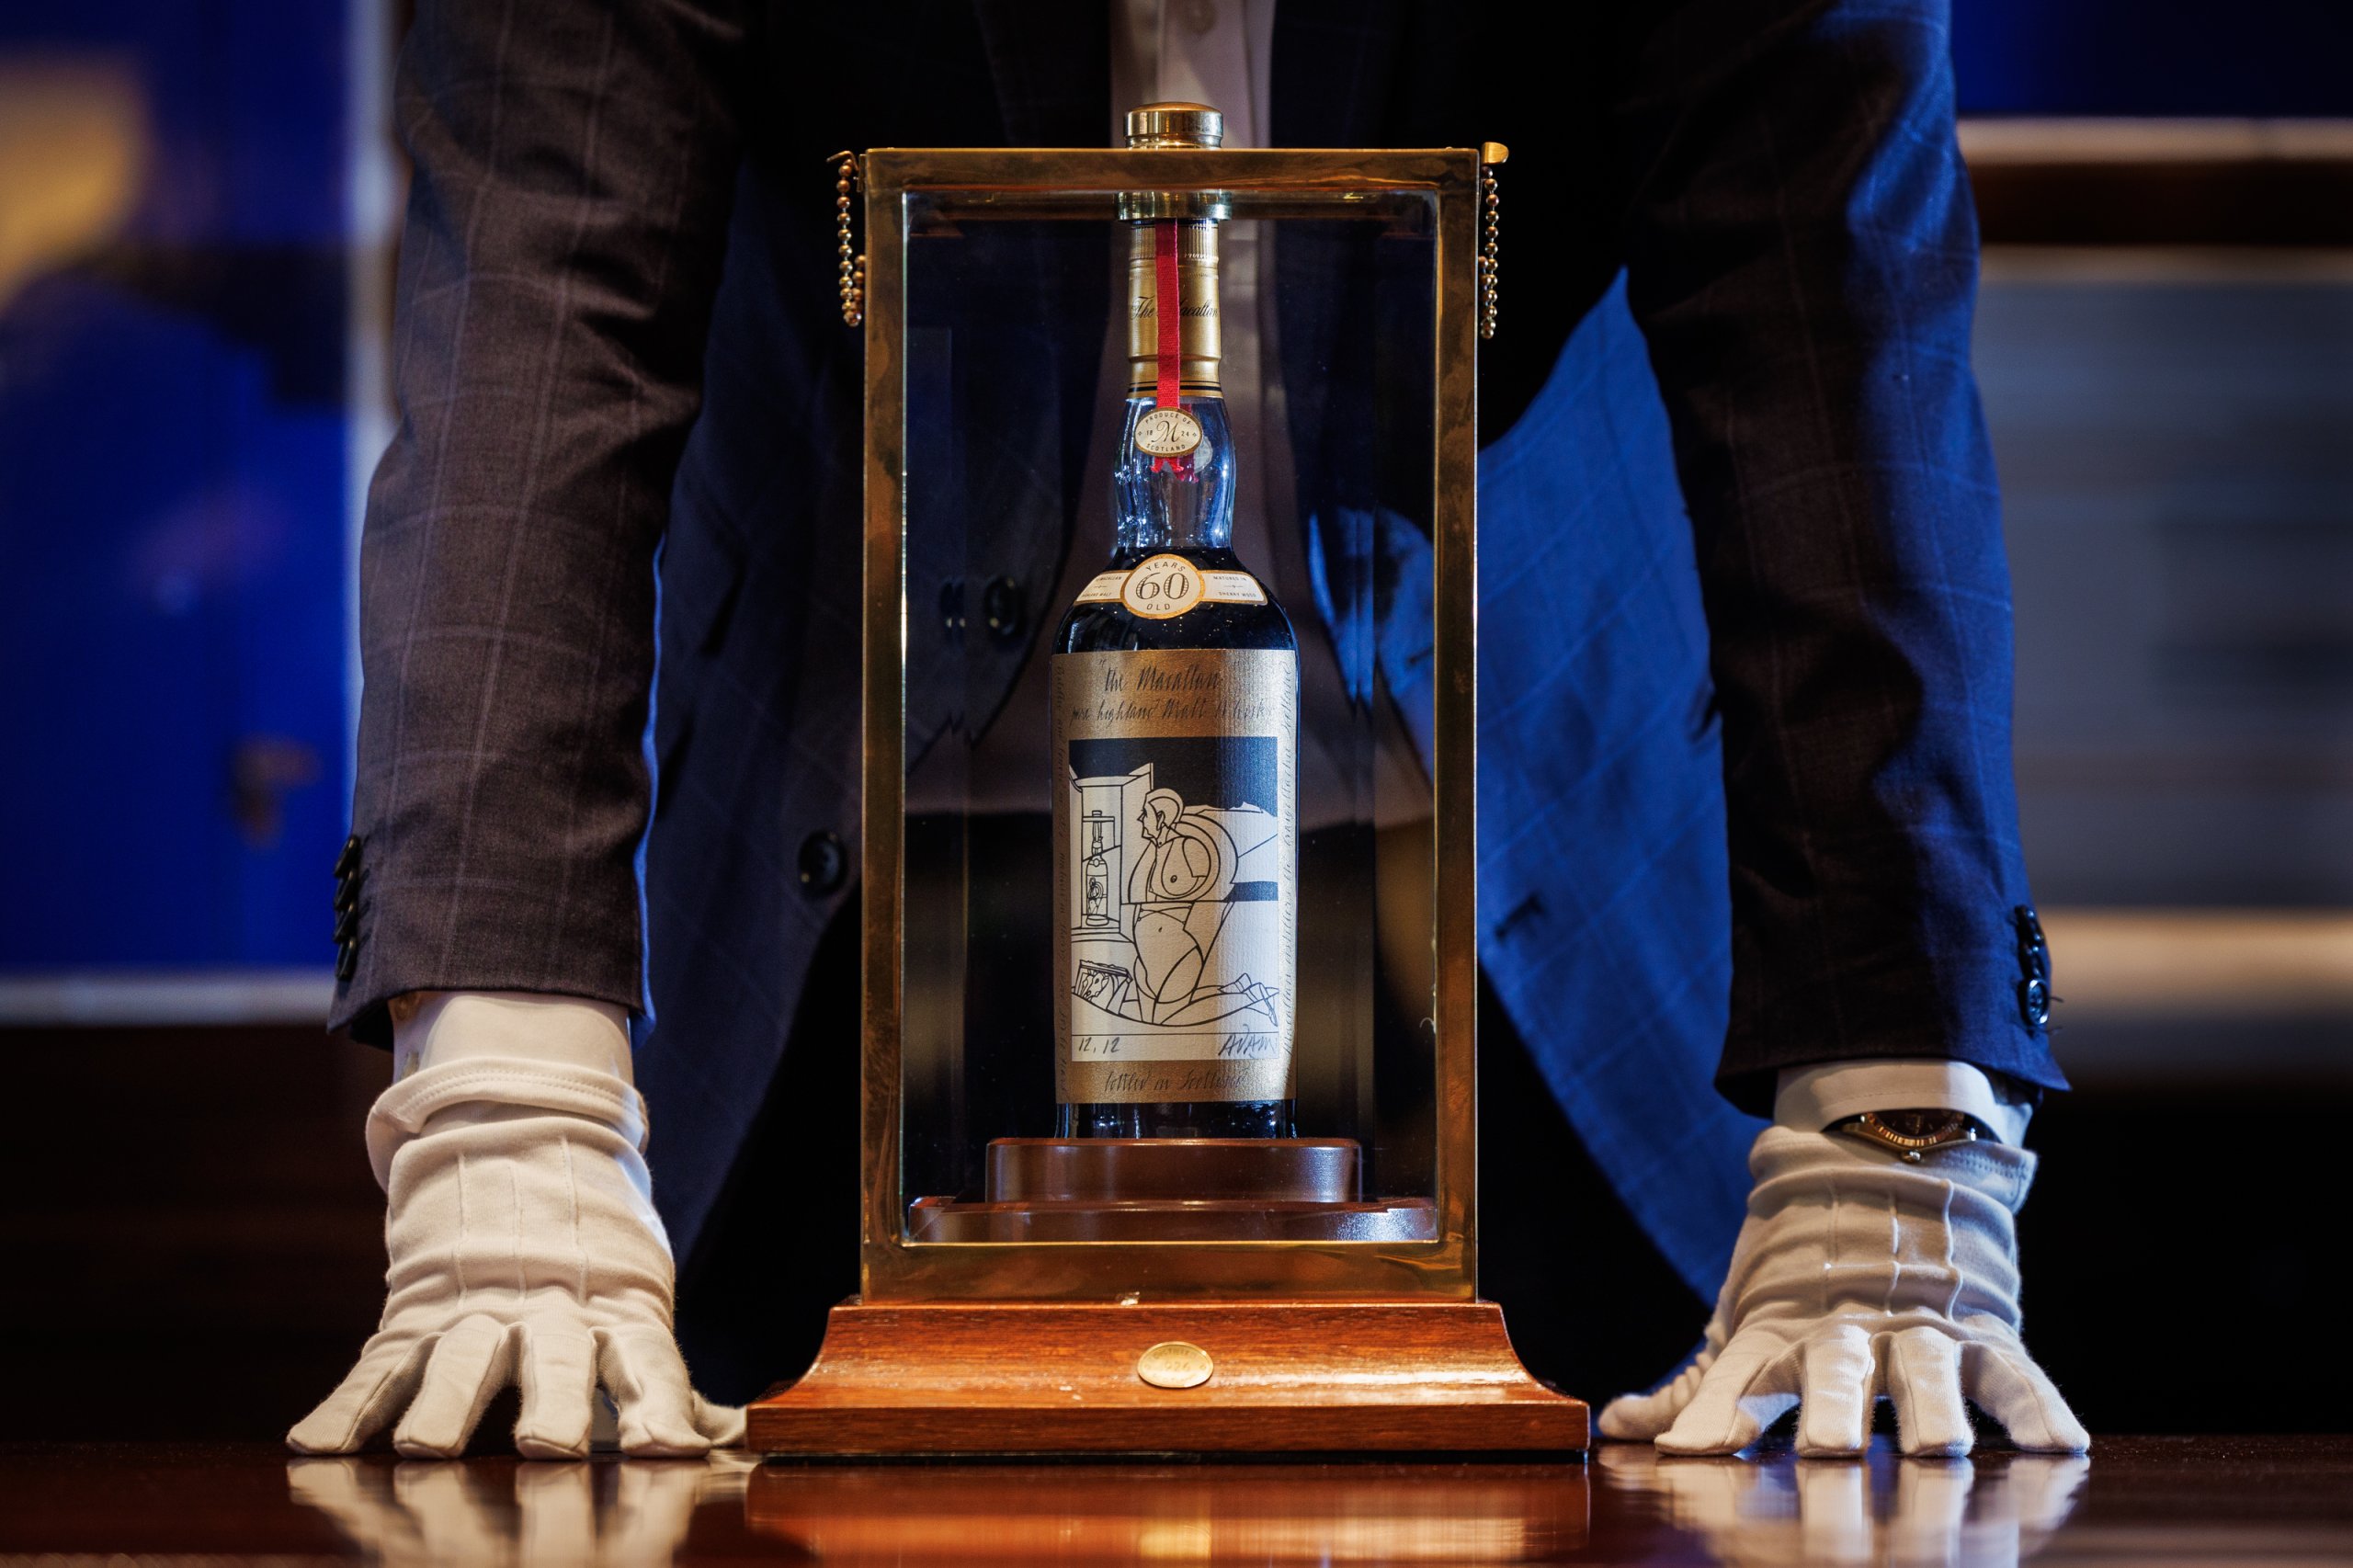 The Macallan 1926 Fine and Rare Valerio Adami edition that set a new world record for the most expensive bottle of whisky ever sold at auction on November 18, 2023. Image courtesy Sotheby's.